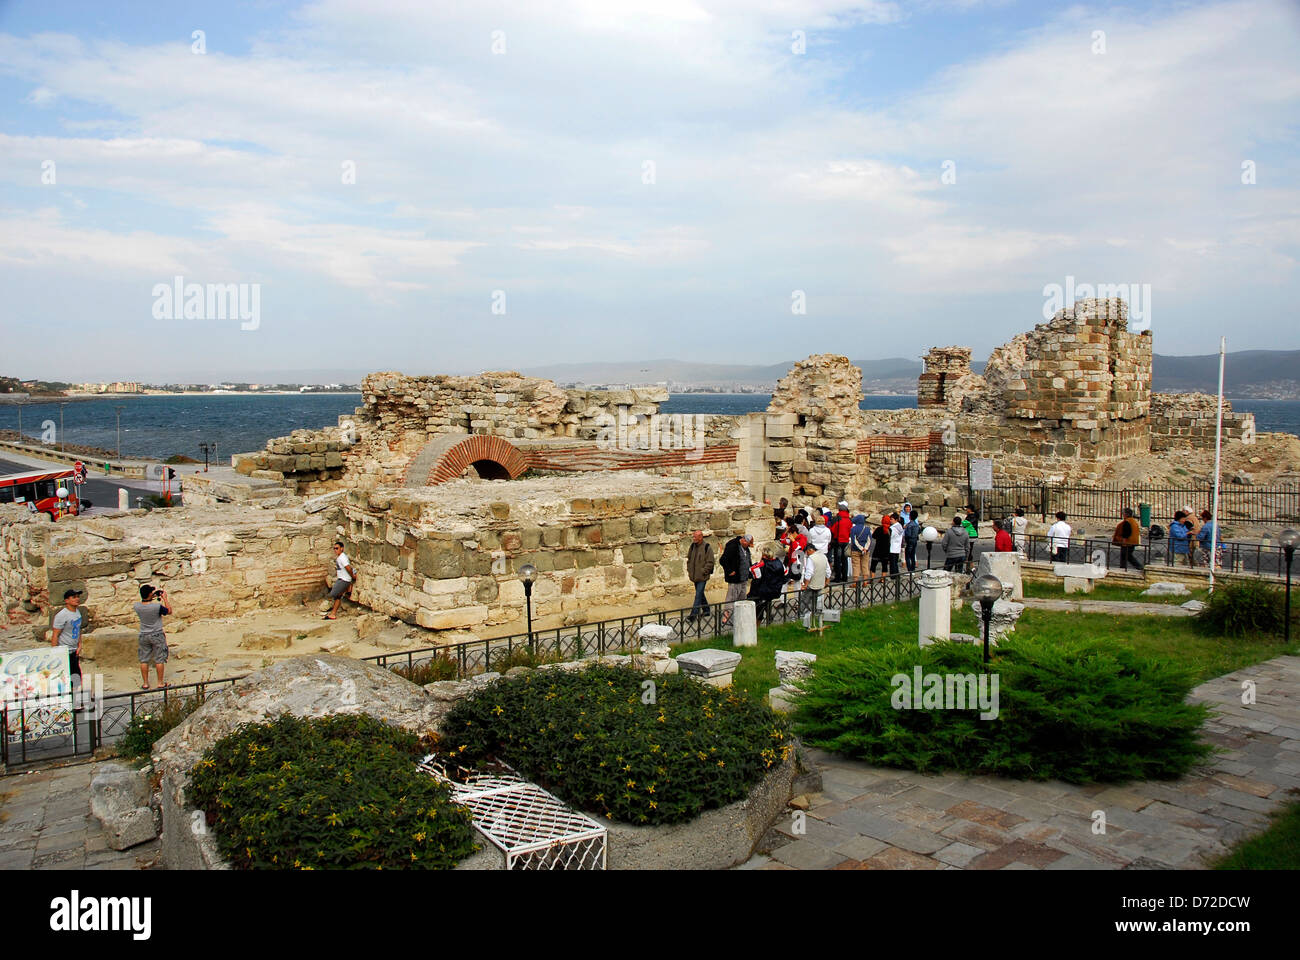 The archeological museum with ruins in Nesebar, Bulgaria Stock Photo